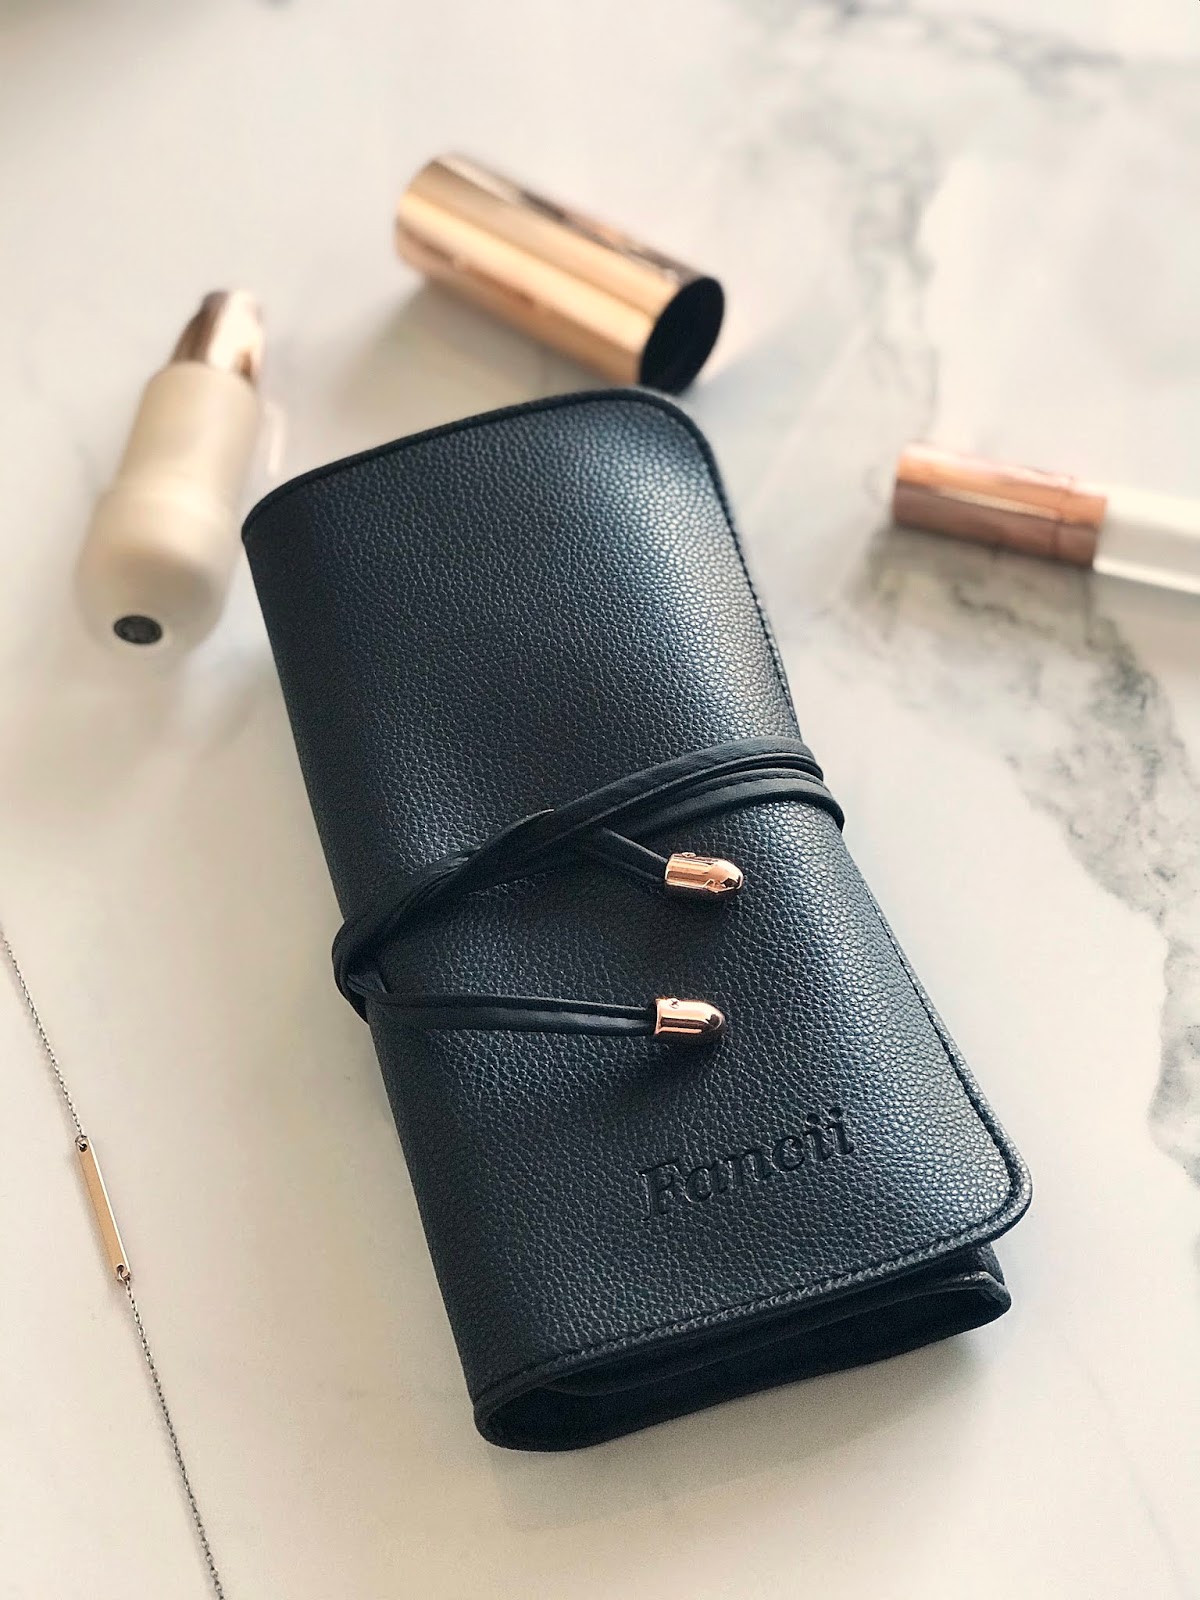 THE PRETTIEST ROSE GOLD MAKEUP BRUSHES | FANCII ARIA PROFESSIONAL ...